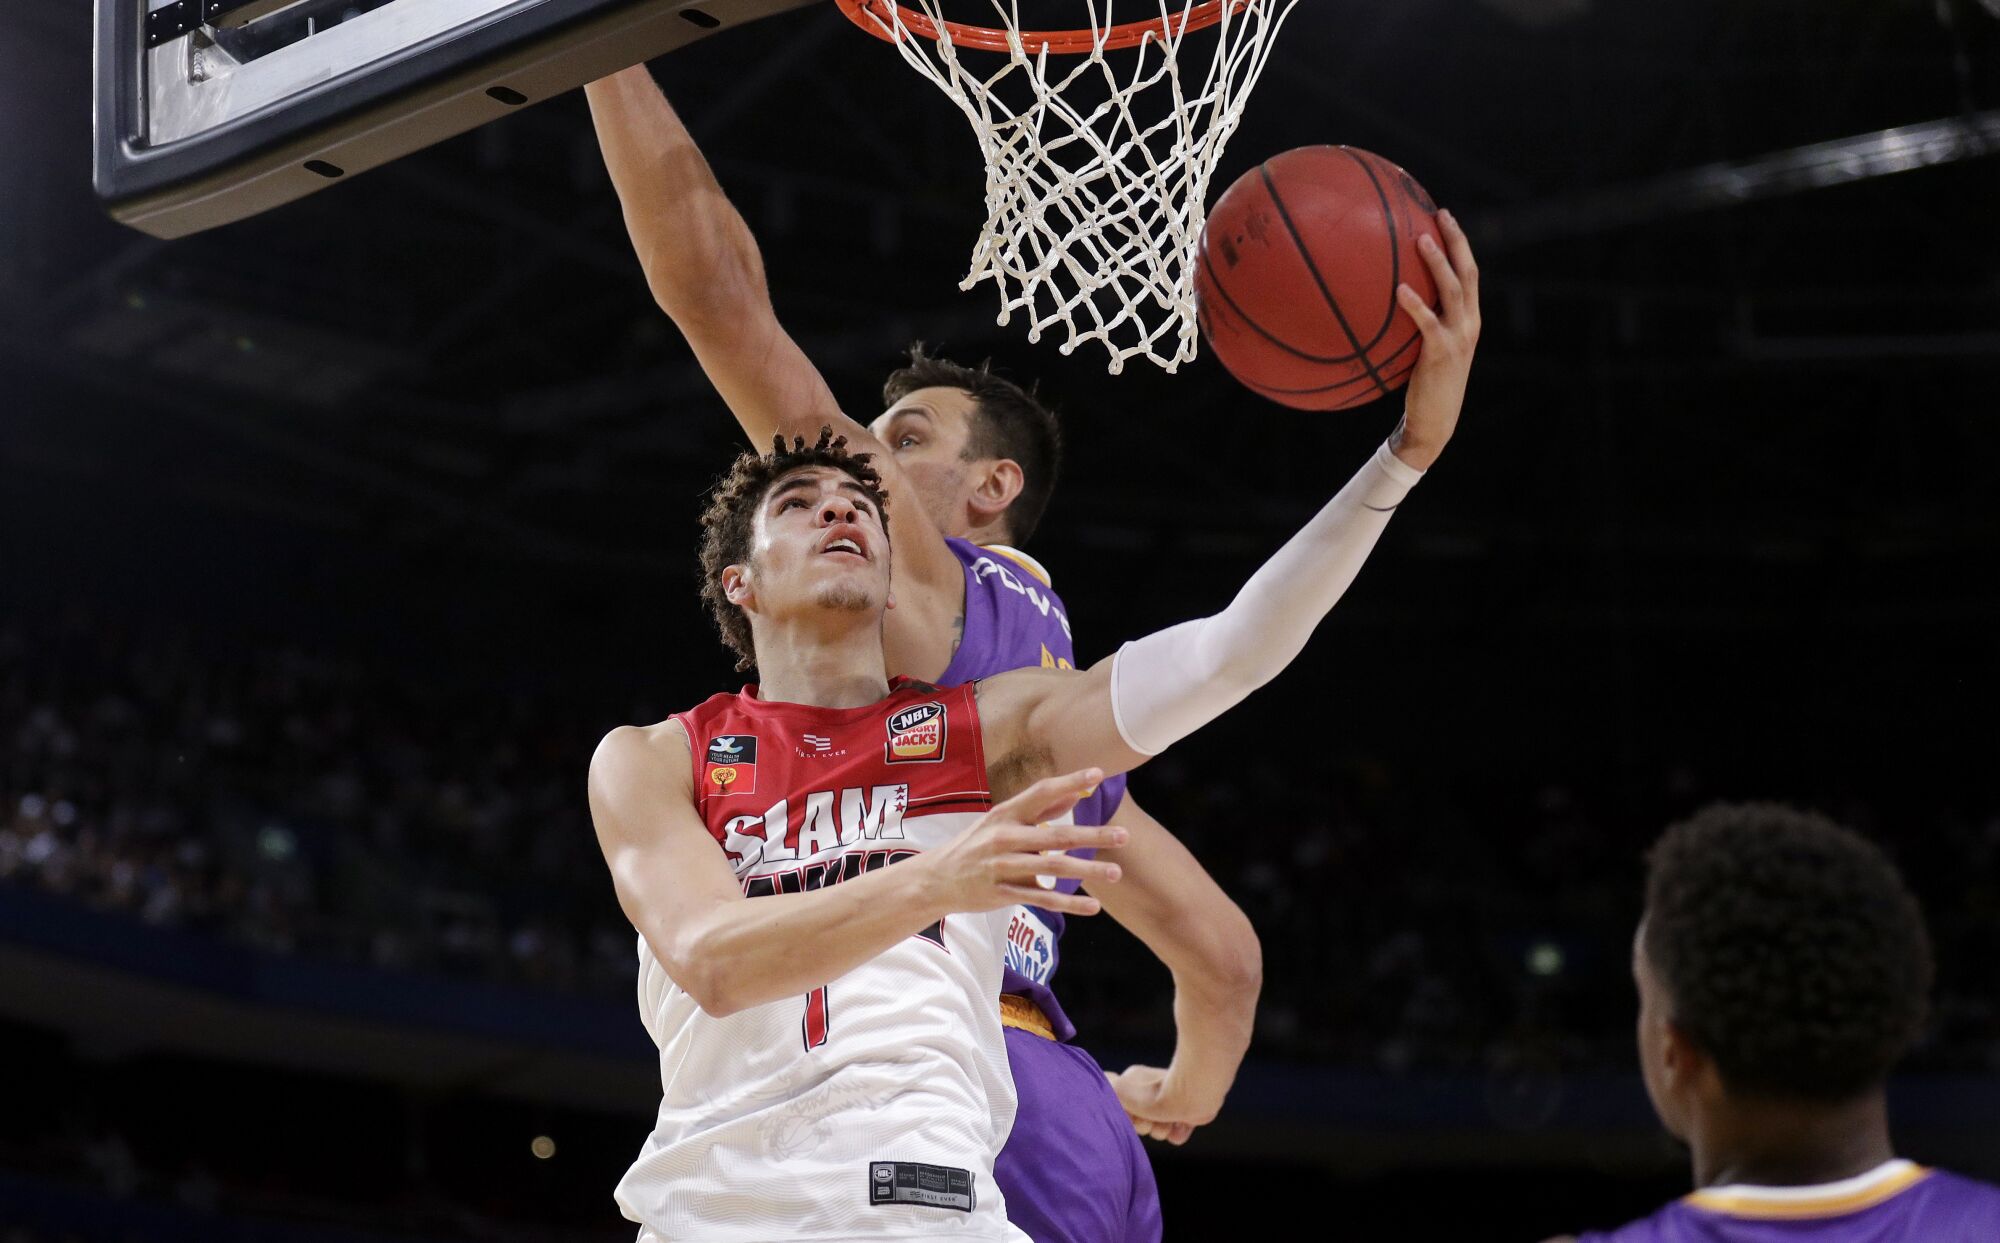 LaMelo Ball of the Illawarra Hawks drives for a layup around Andrew Bogut of the Sydney Kings.